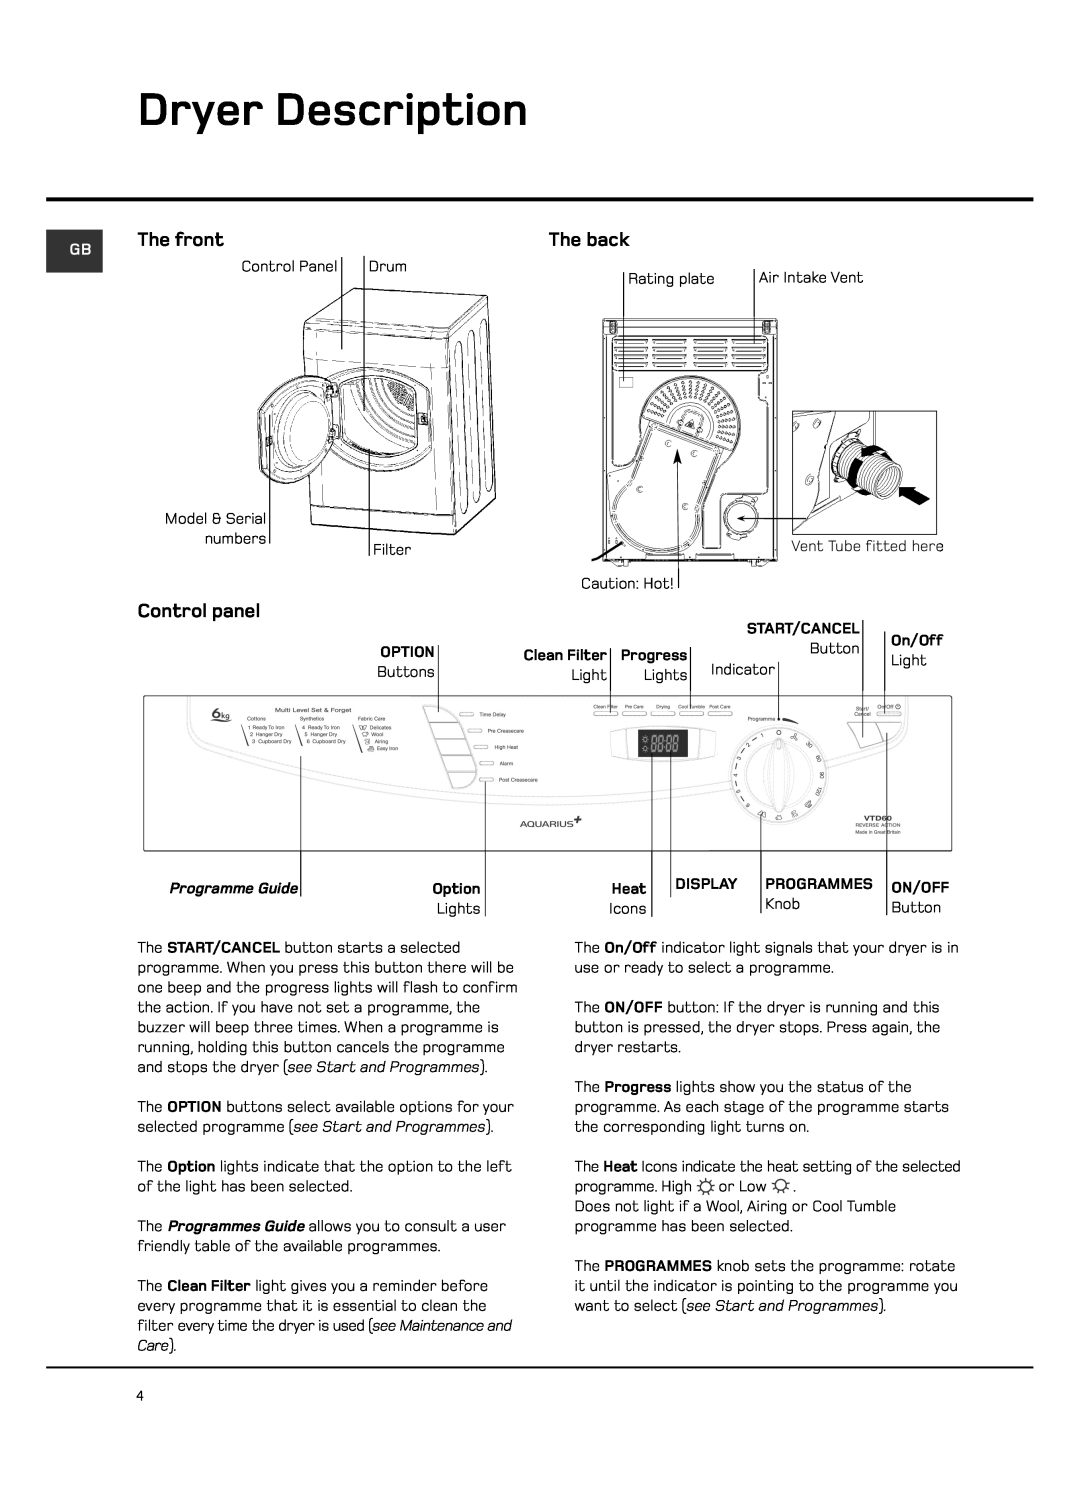 Hotpoint VTD60, VTD65 manual Dryer Description, The front, The back, Control panel, Programme Guide 